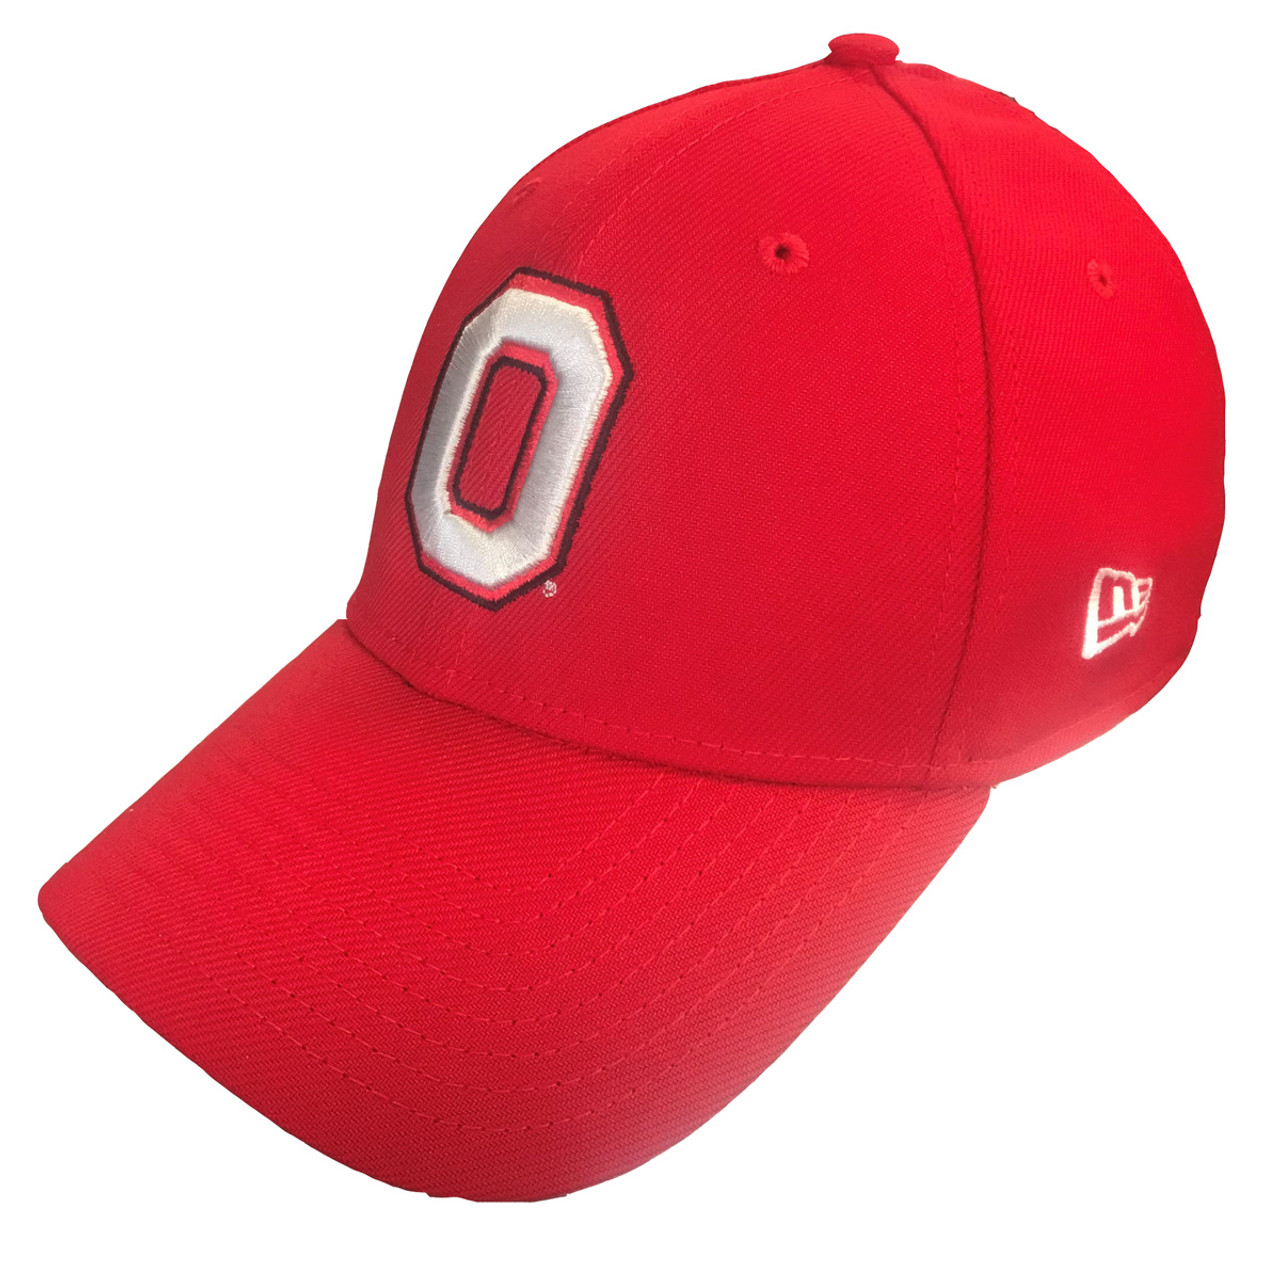 Ohio State Red Block O Fitted Cap - College Traditions